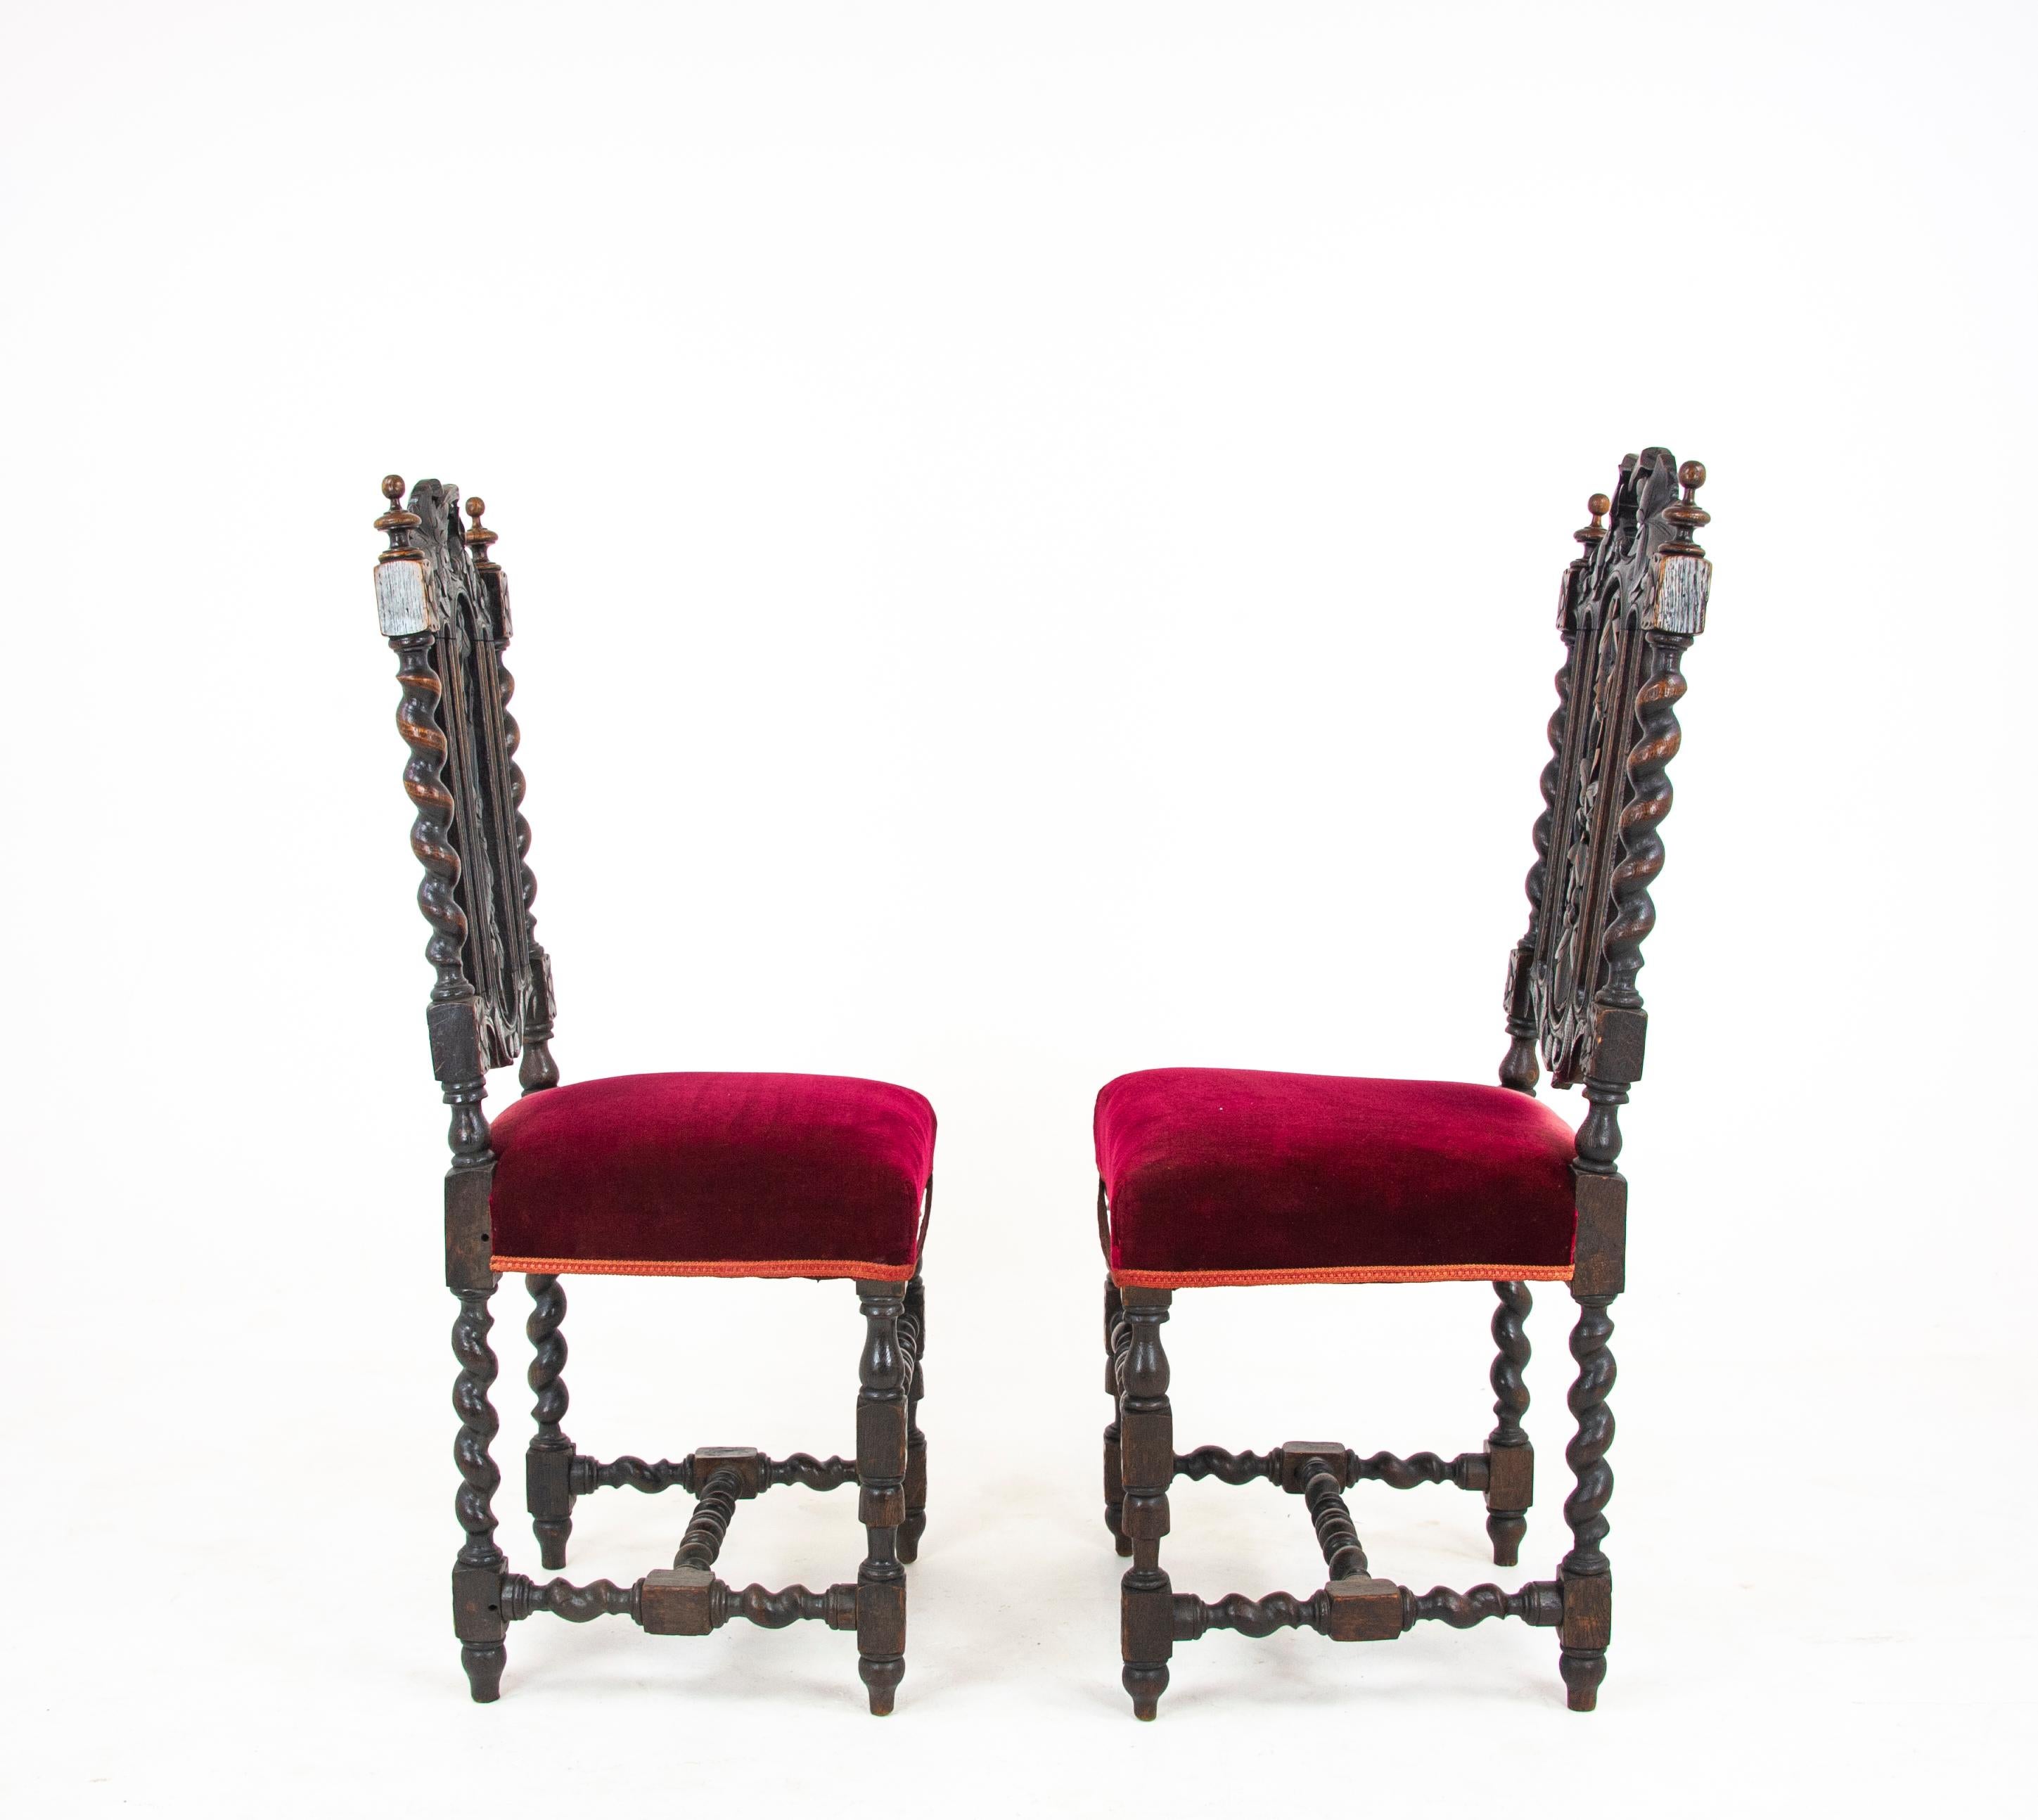 Scottish Two-Oak Carved Chairs, Hall Chairs, Barley Twist, Scotland 1880